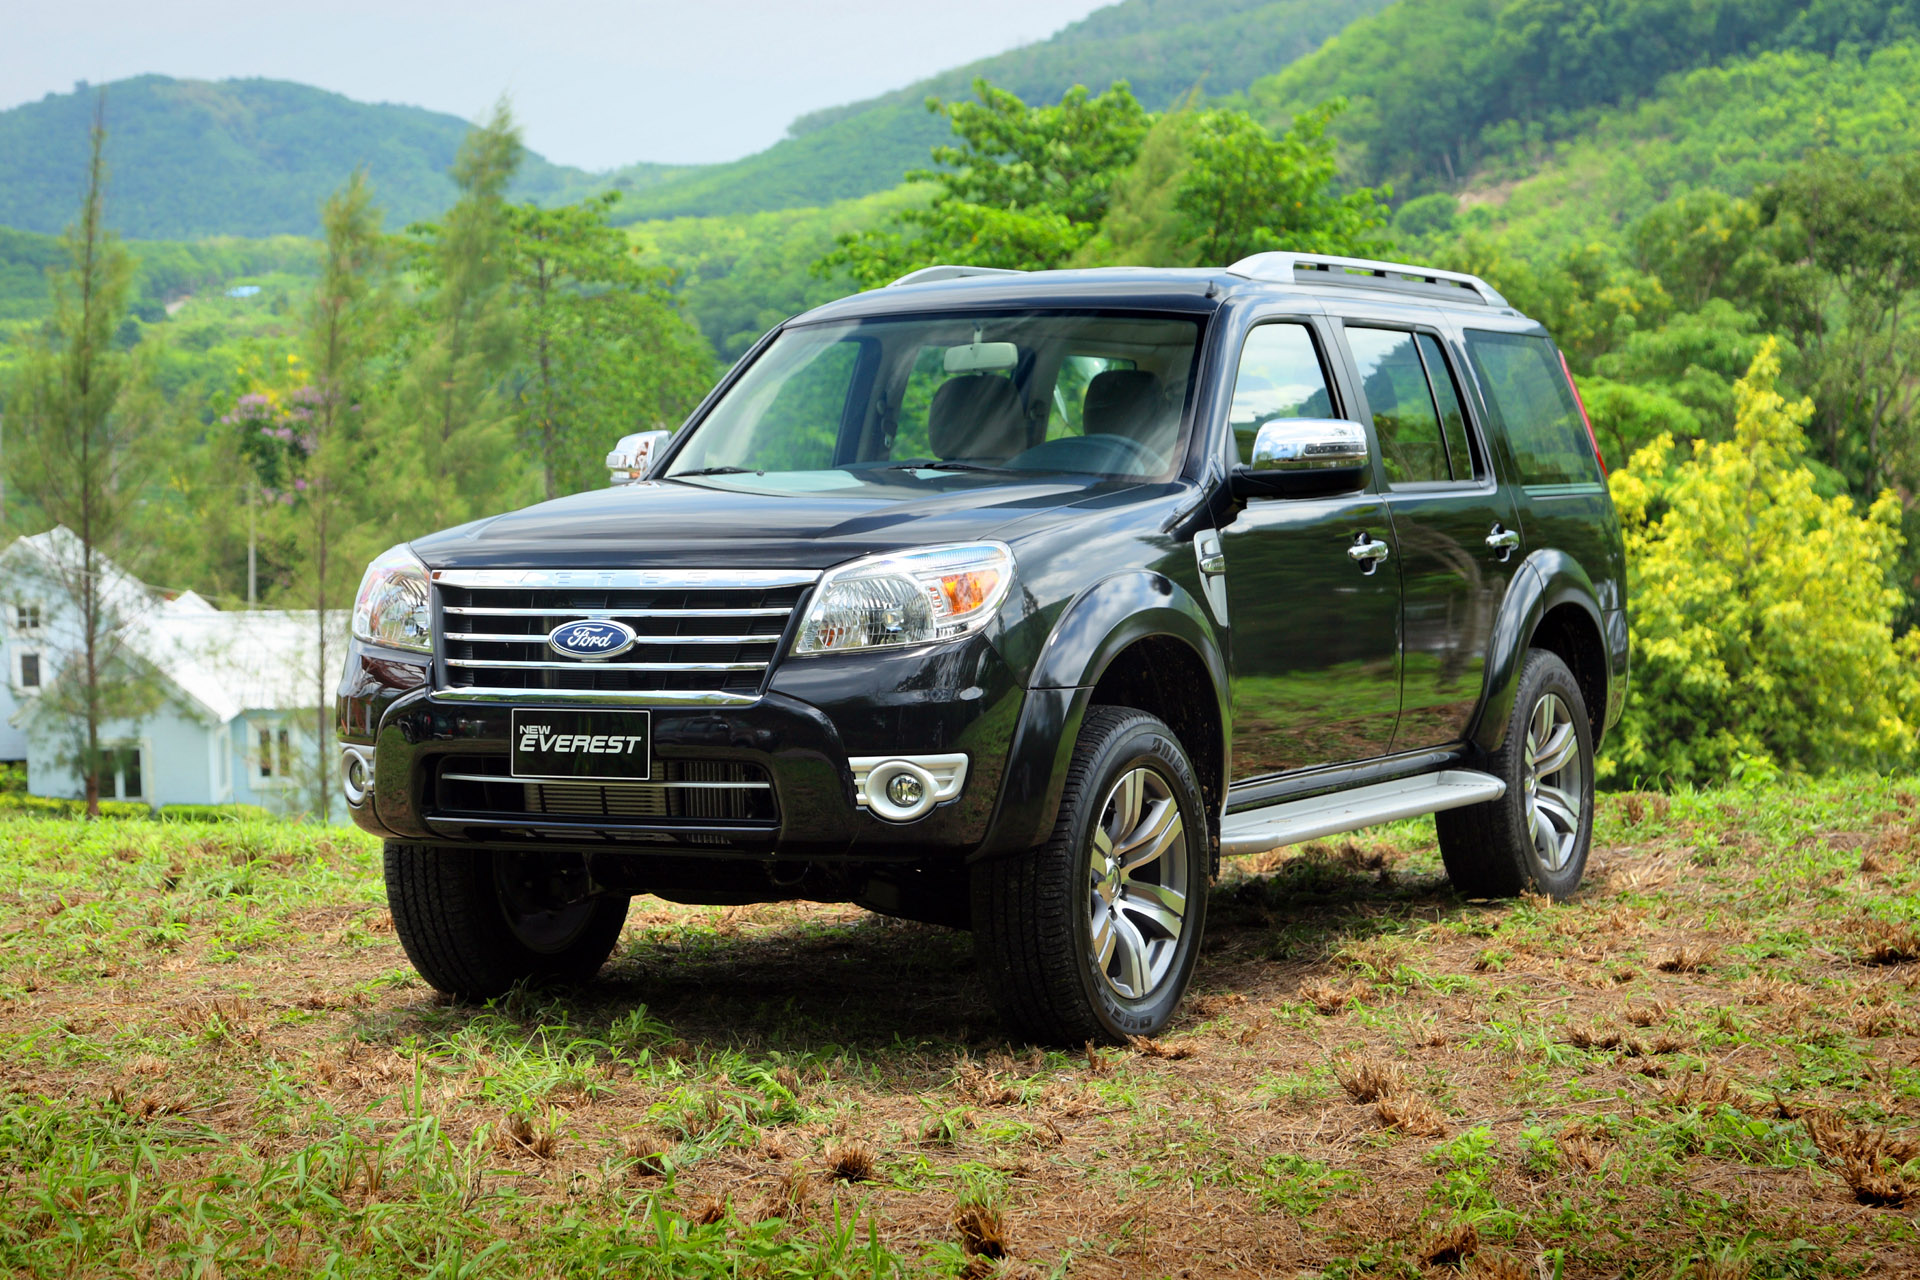 Ford Everest picture # 69065 | Ford photo gallery | CarsBase.com